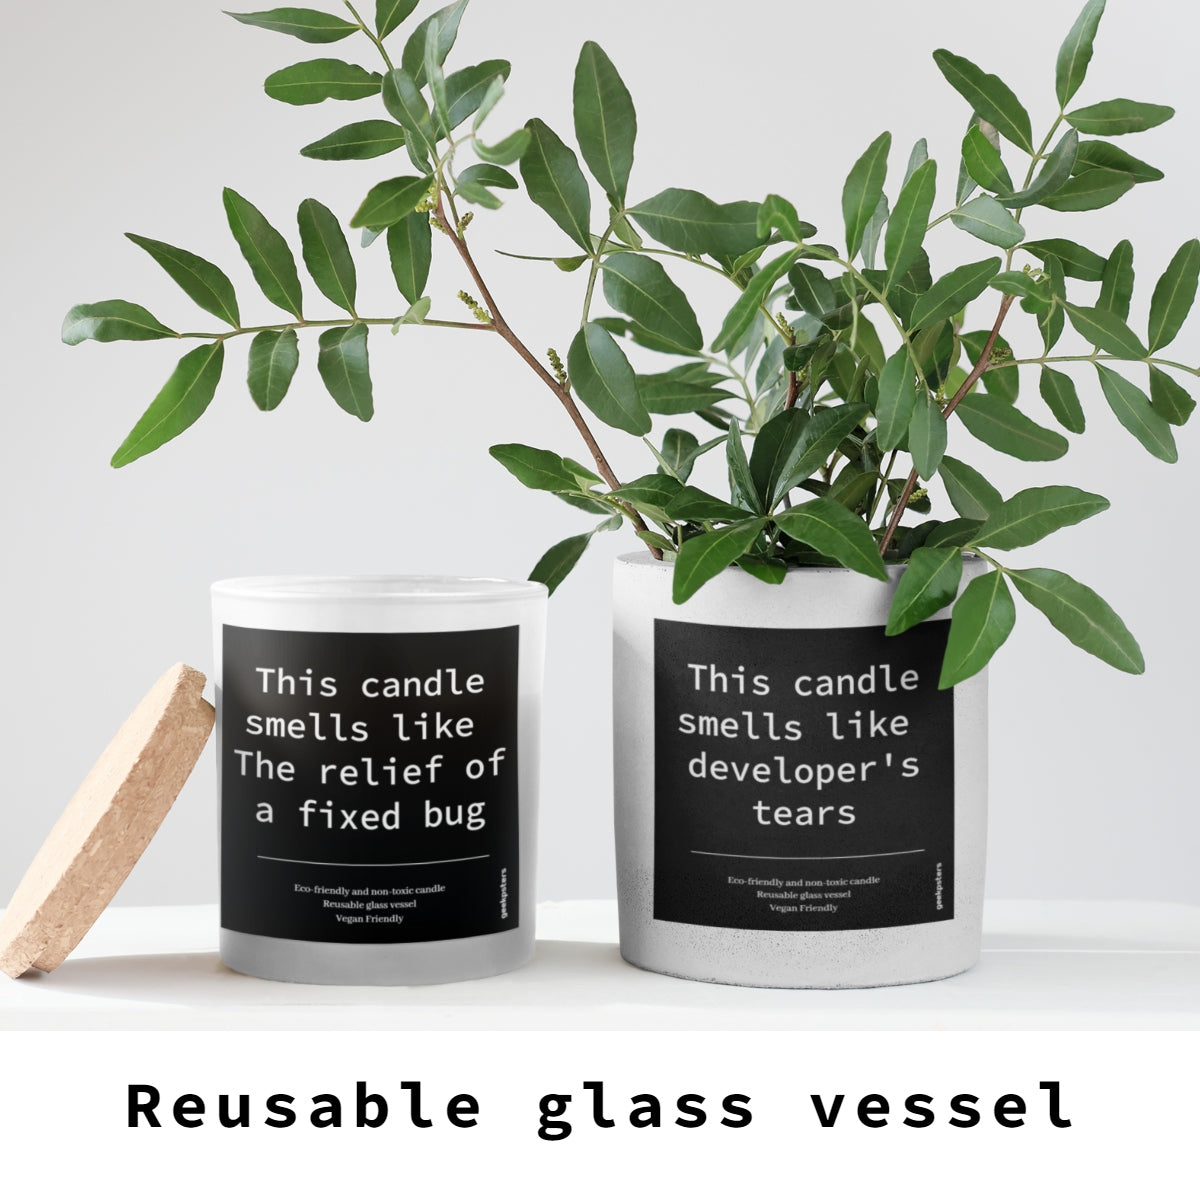 Two "This Candle Smells Like a Successful Code Review" 9oz soy candles in reusable glass vessels with humorous labels, next to a green plant and a piece of wood, on a grey background.